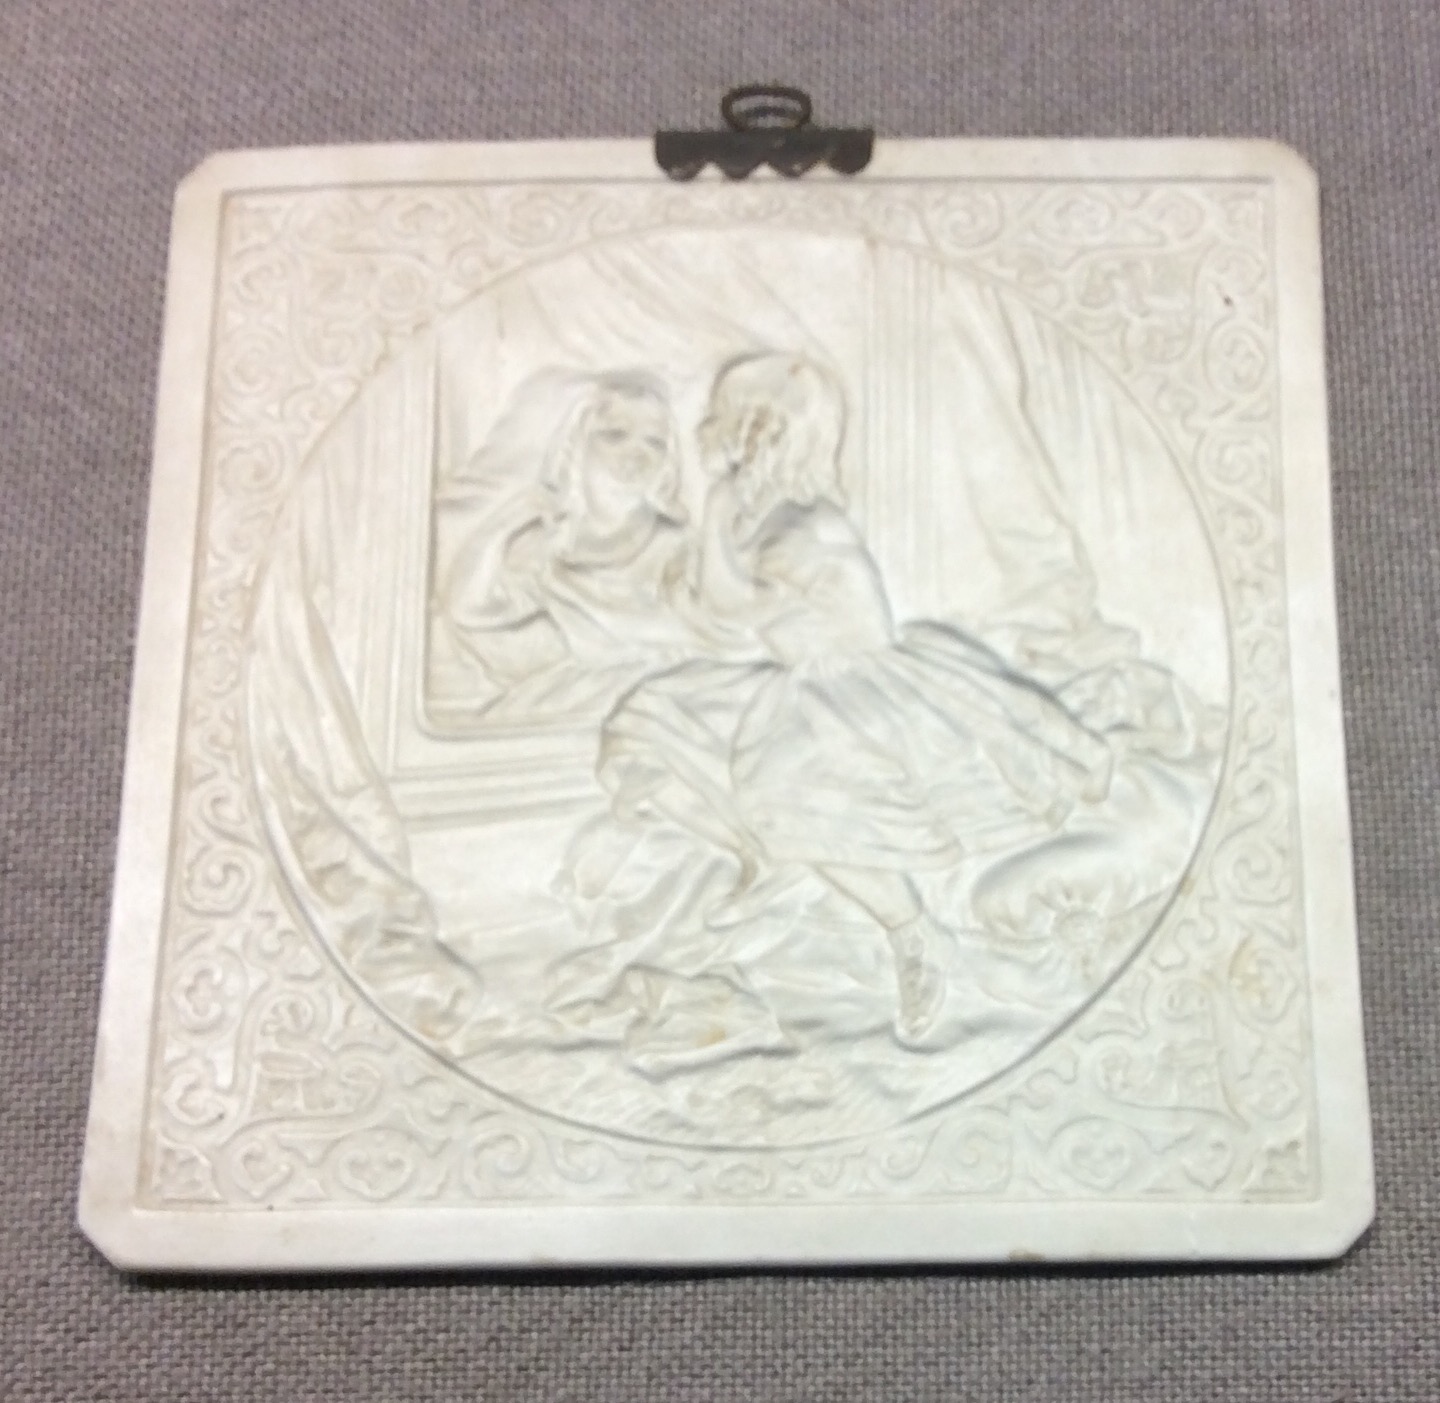 A 19TH CENTURY FINE PORCELAIN LITHOPANE PANEL Moulded to depict a young girl, seated at a dressing